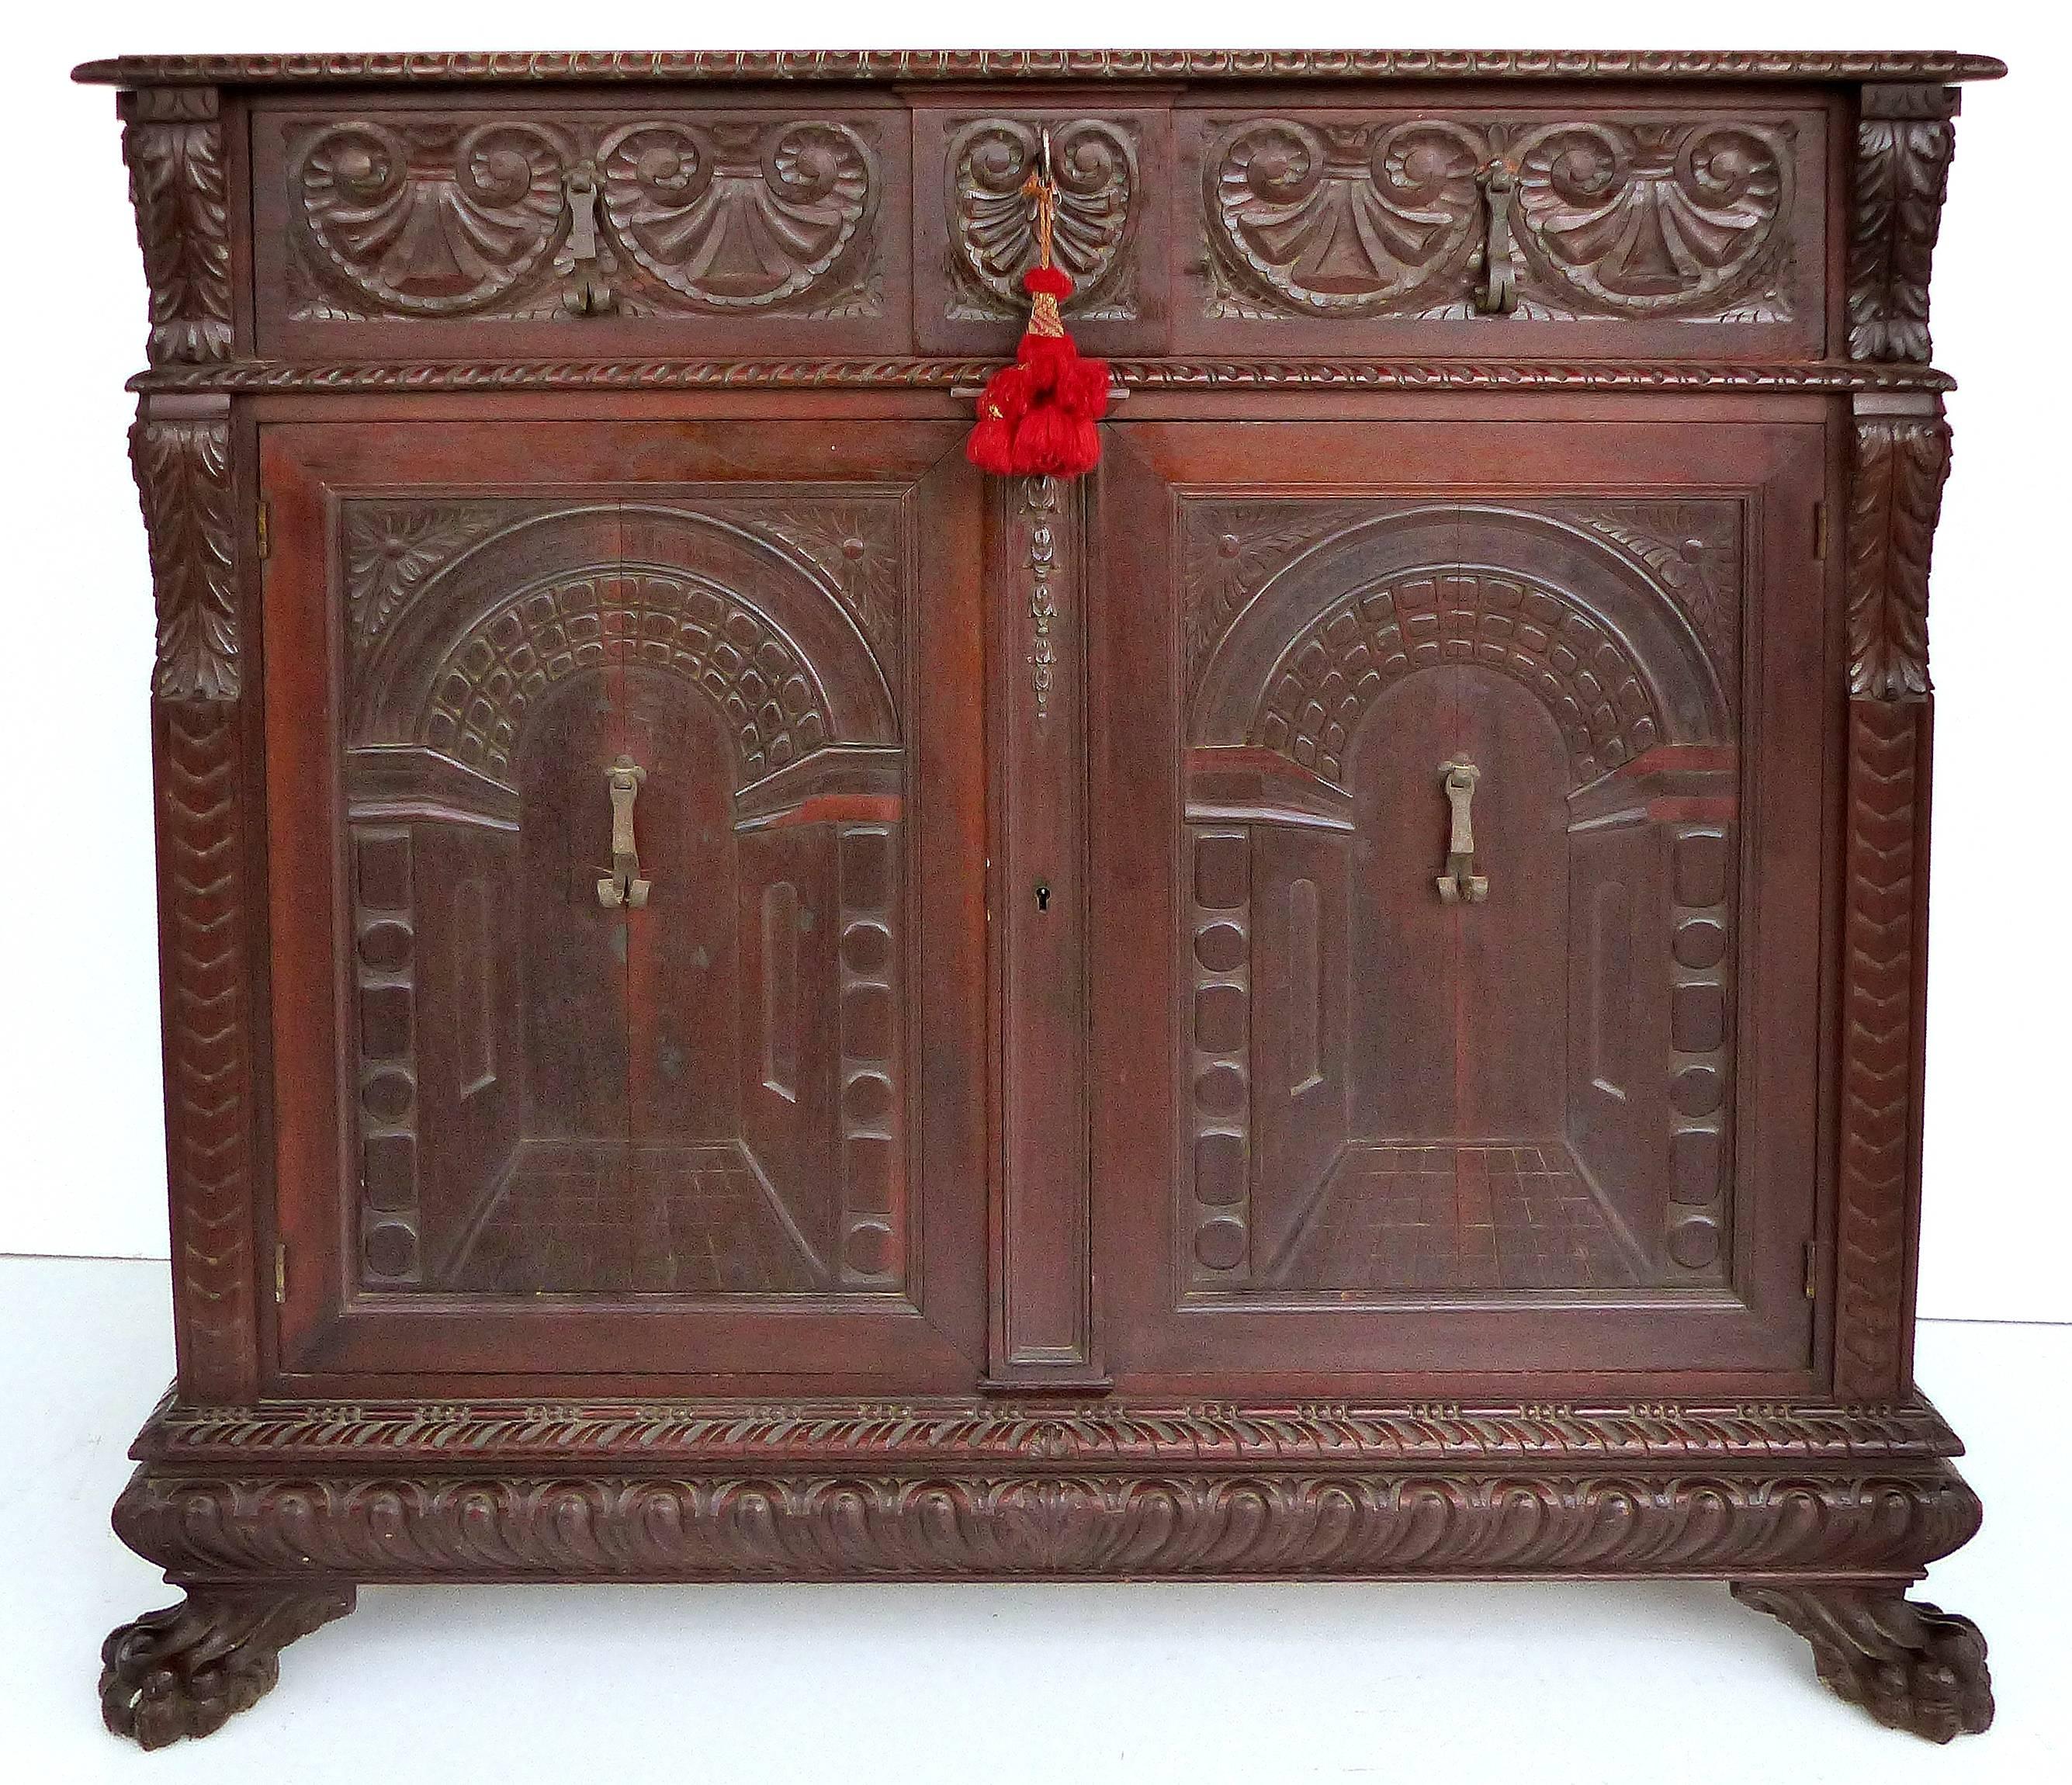 American Renaissance Revival Carved Cabinet by S. Pagano, New York Dated 1930

Offered is an American renaissance revival cabinet signed S. Pagano, New York, 1930 on the back upper edge. From a prominent Coconut Grove estate of the heirs of the Eli